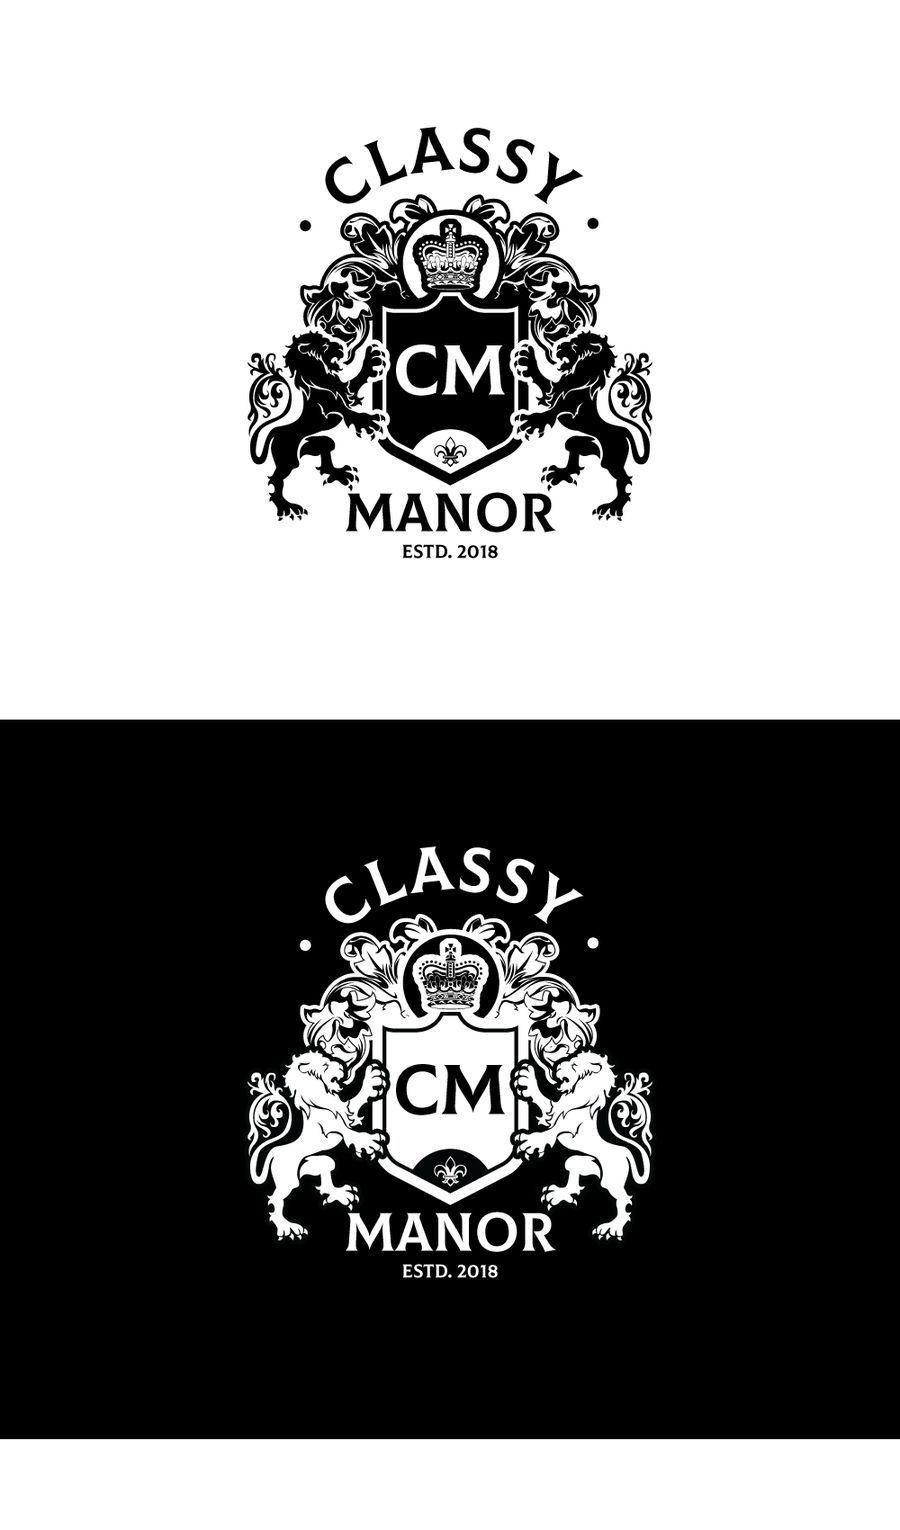 Royal Clothing Logo - Entry by totemgraphics for The brand name is “Classy Manor”. It